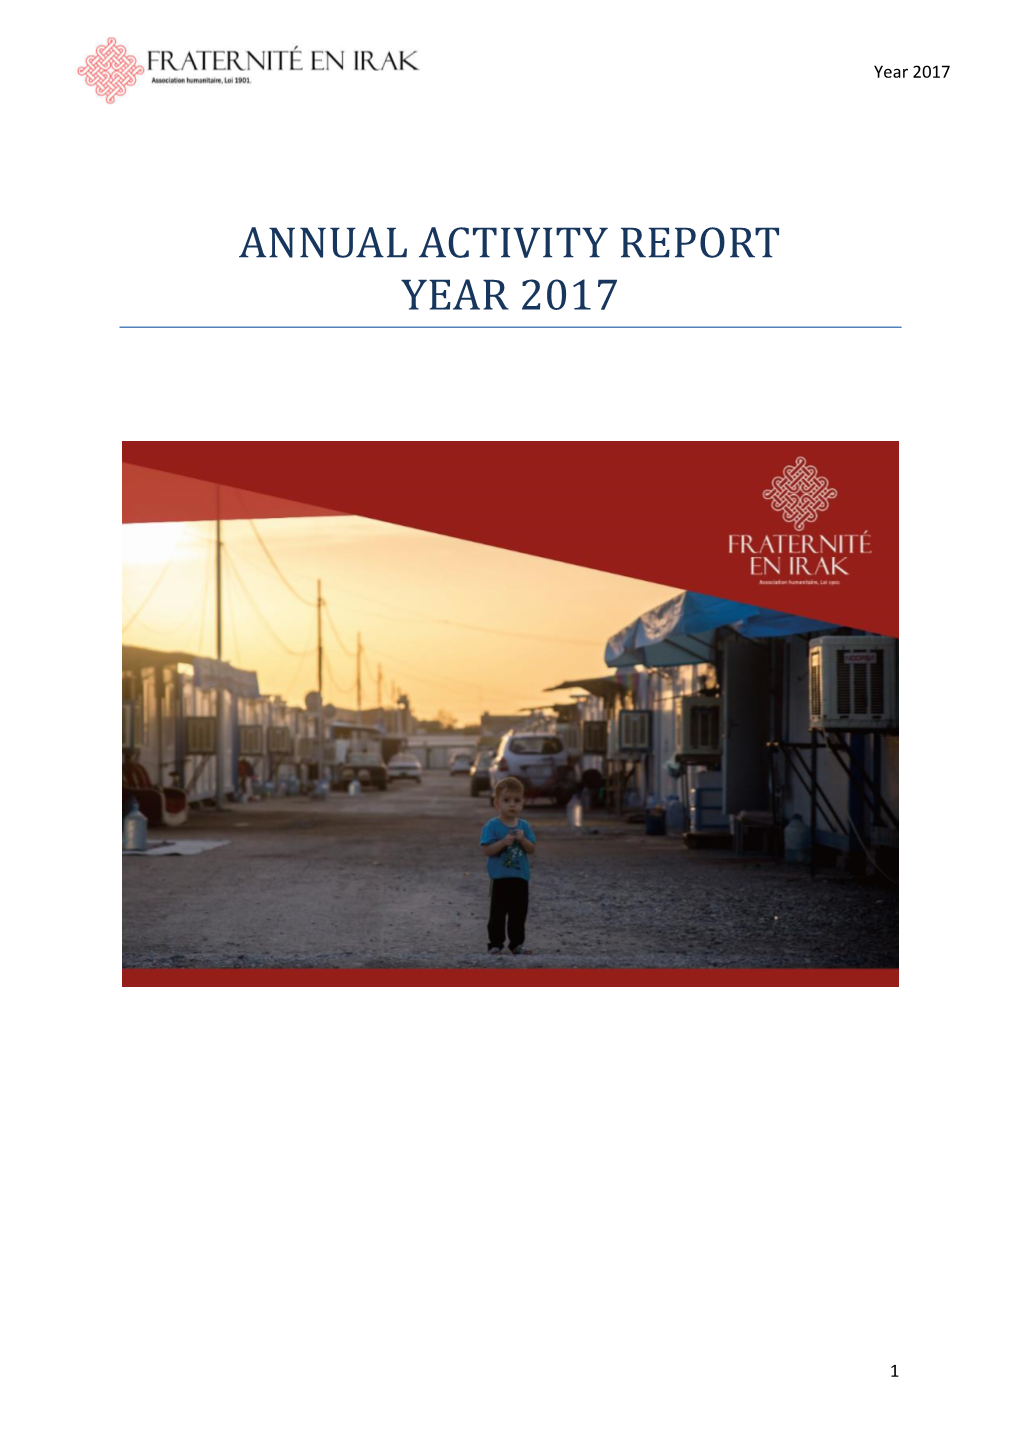 Annual Activity Report Year 2017